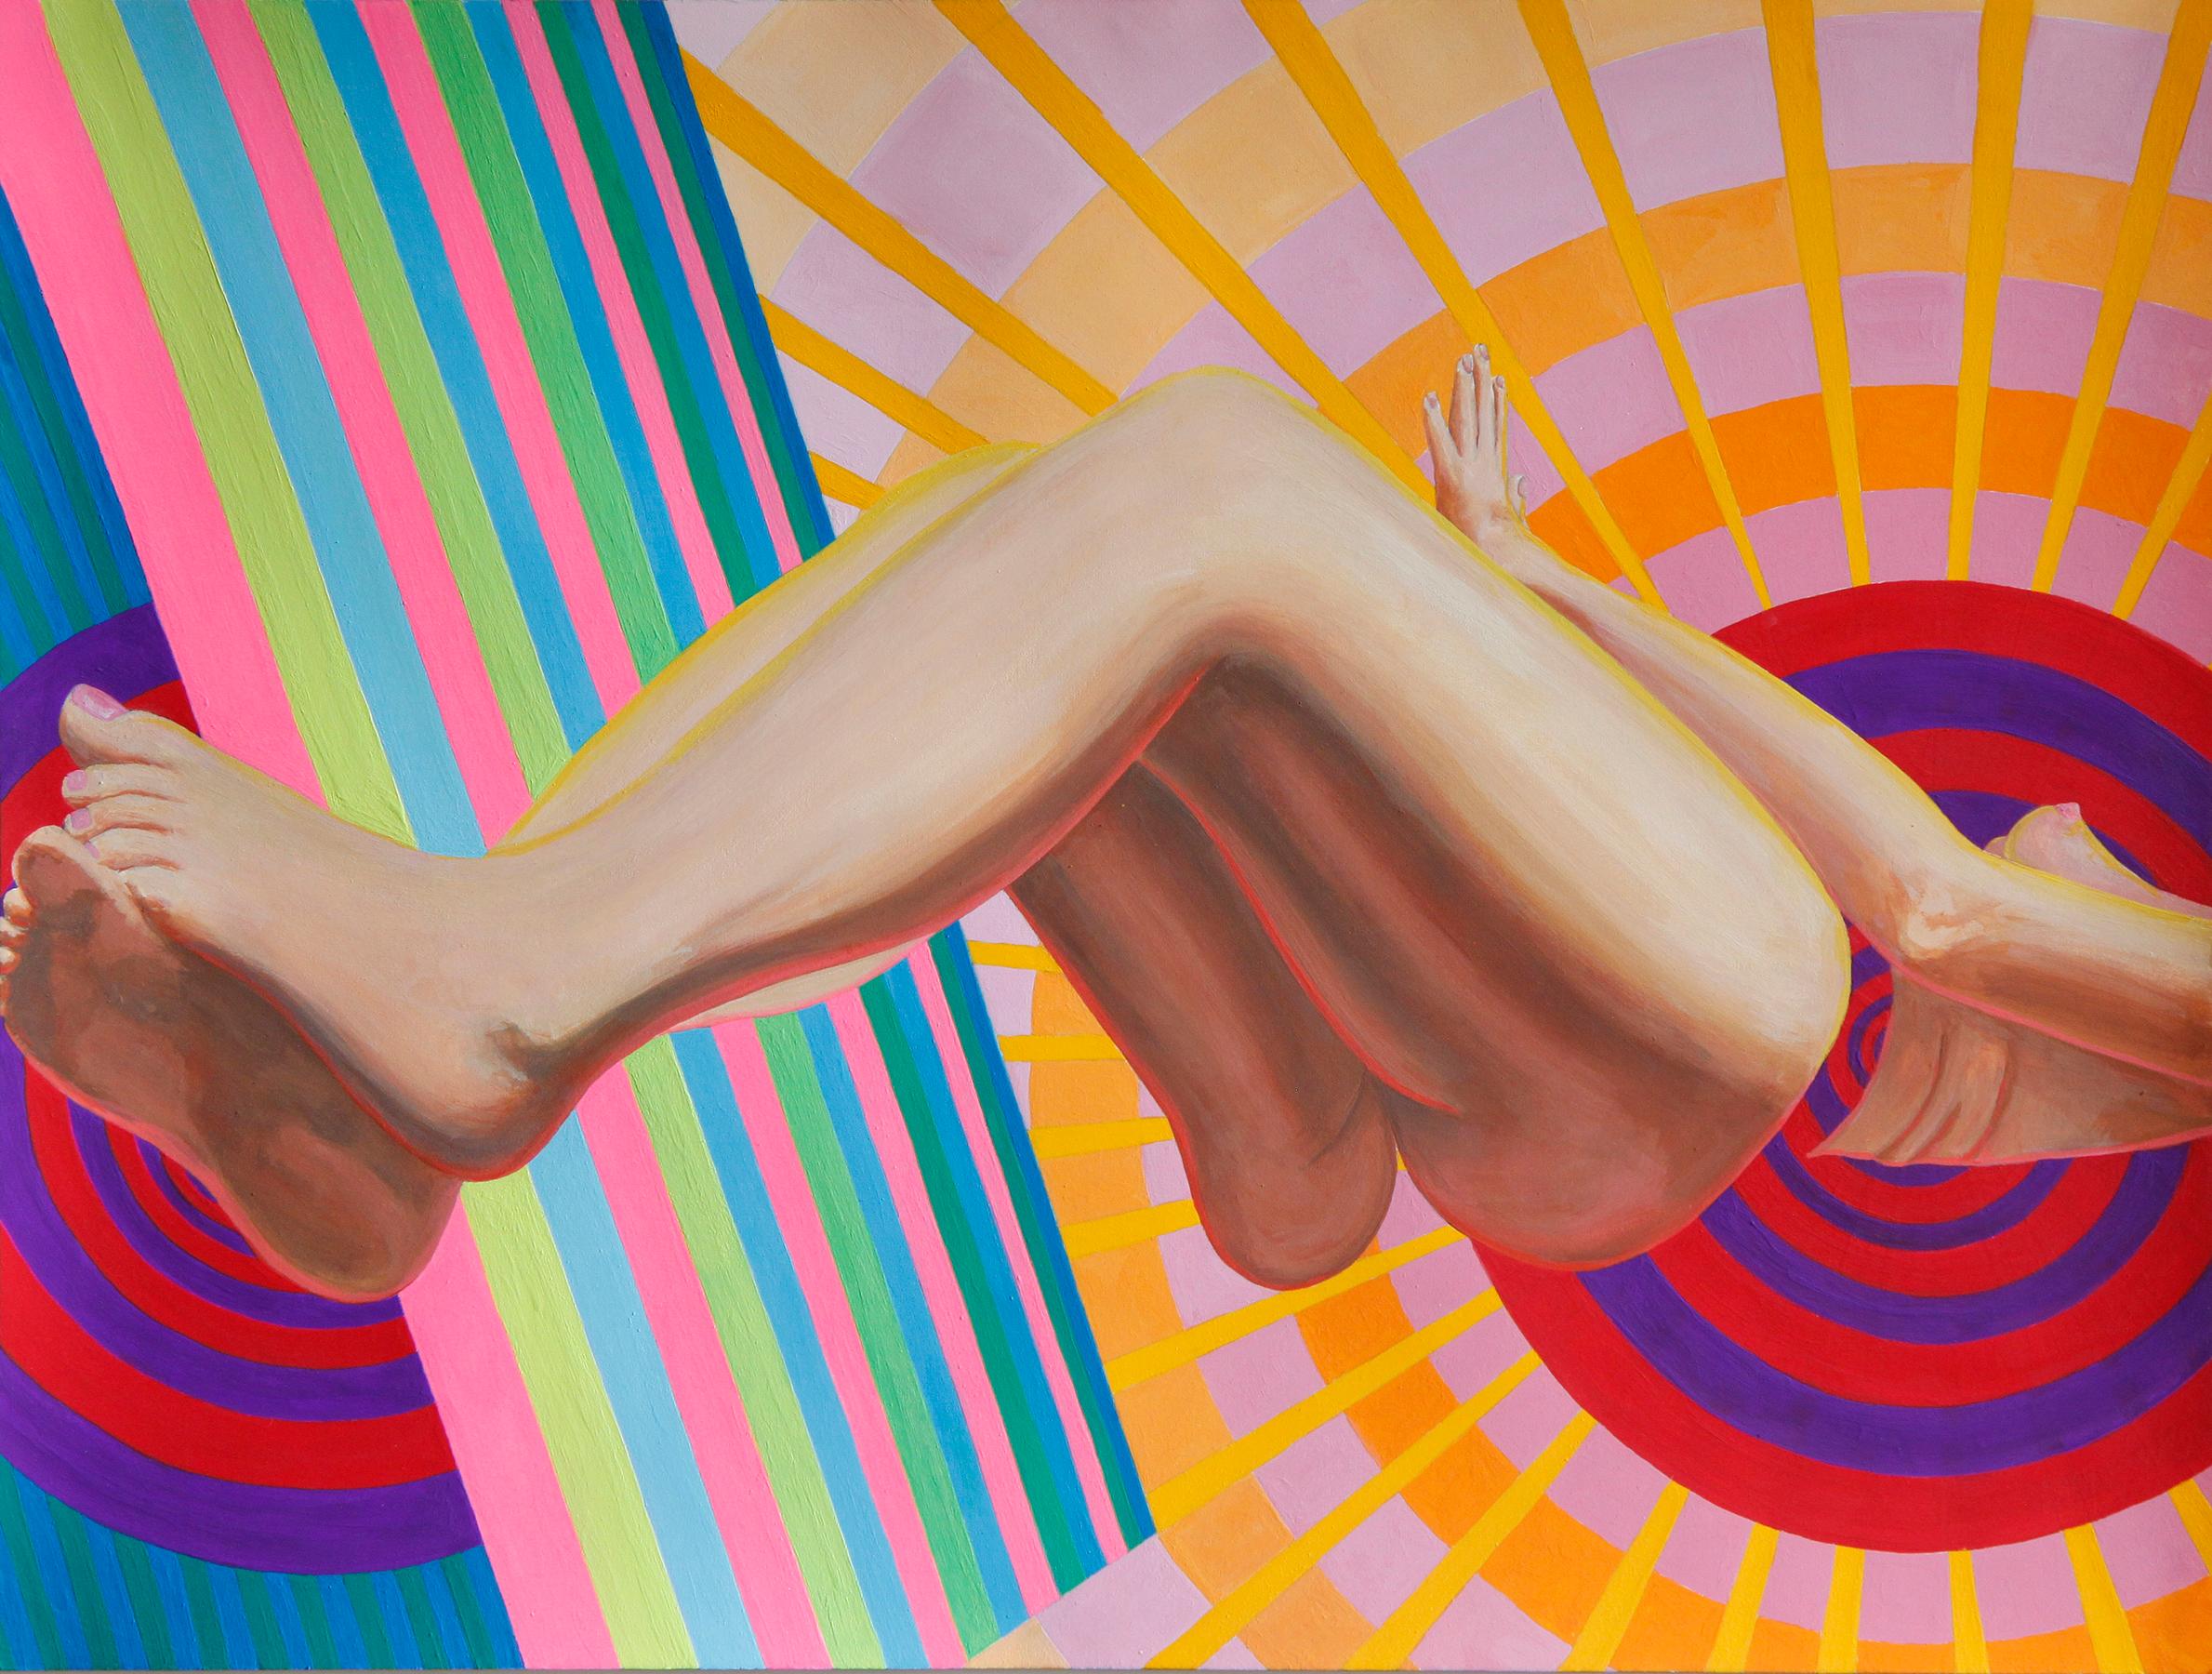 "Radiator" Optical Art Contemporary Painting with Female Figure